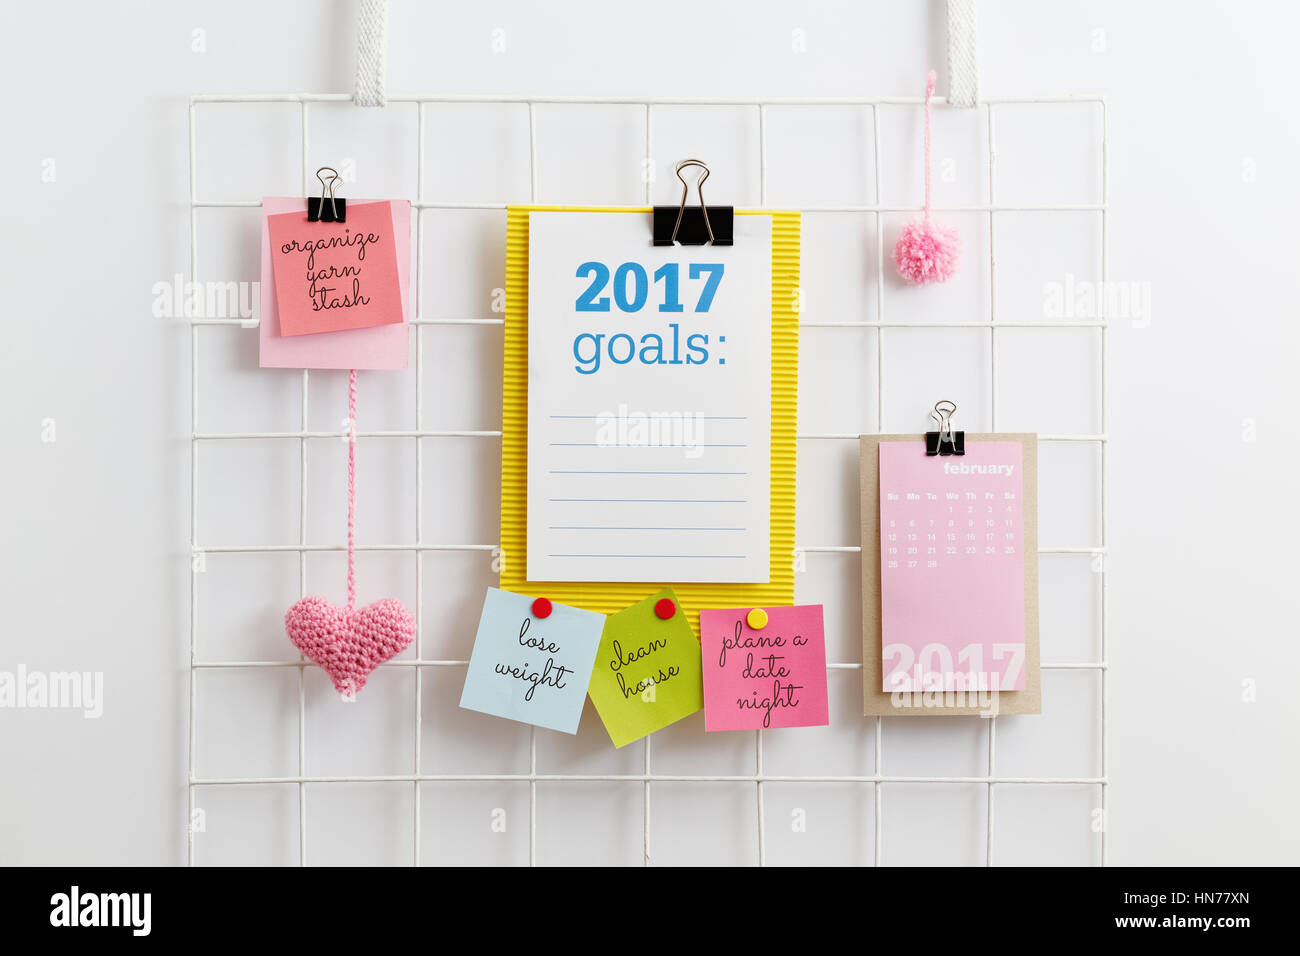 New Year's Resolutions. Paper note written with 2017 GOALS on diy metal mesh grid wall organizer. Metal grid display with pink heart and pom pom. Stock Photo